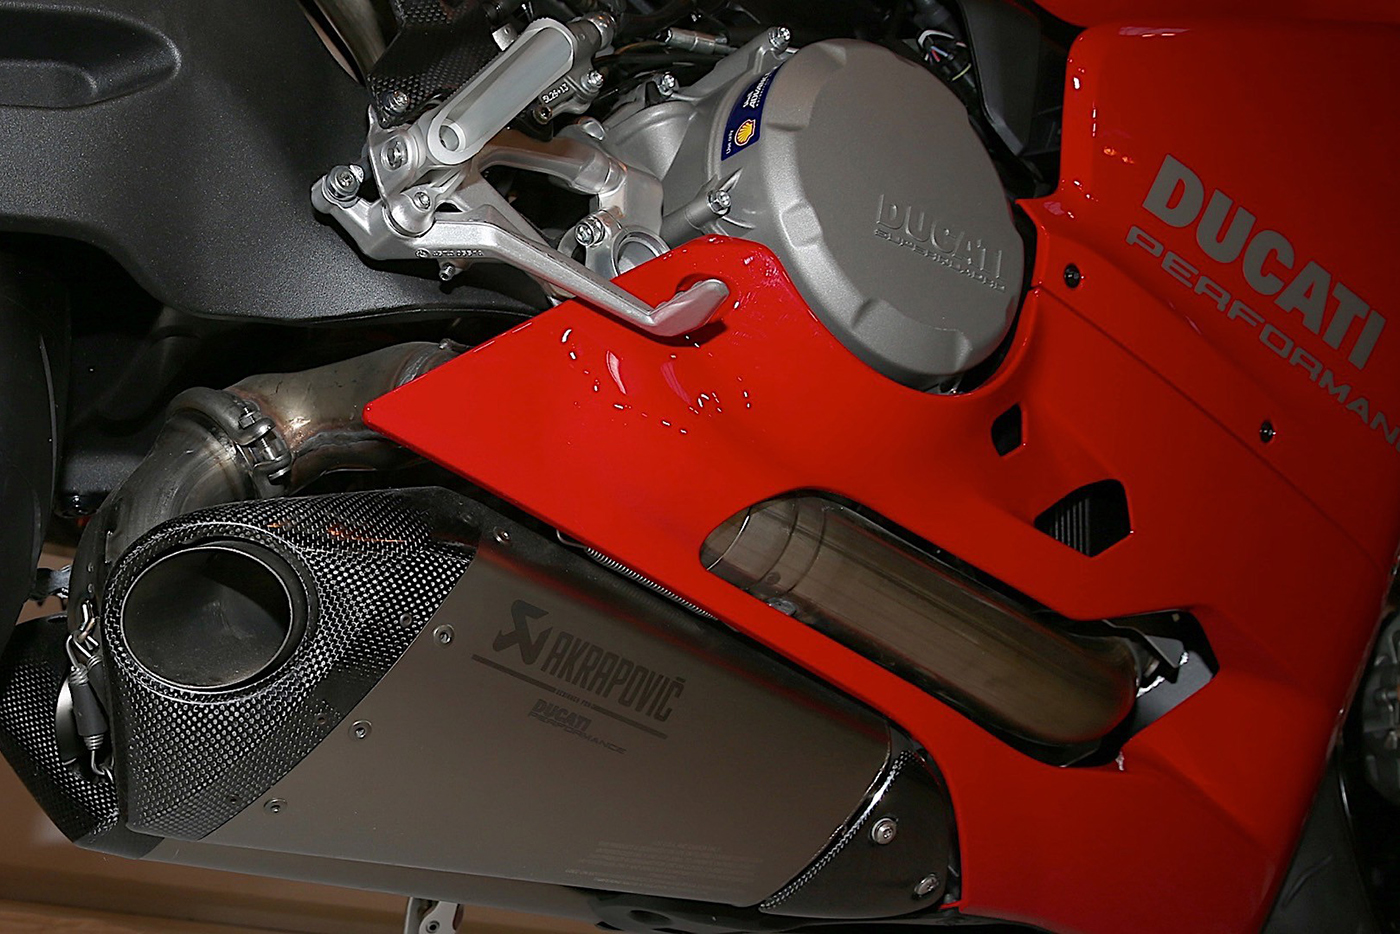 special-edition-ducati-959-panigale-announced-for-the-uk-3.jpg